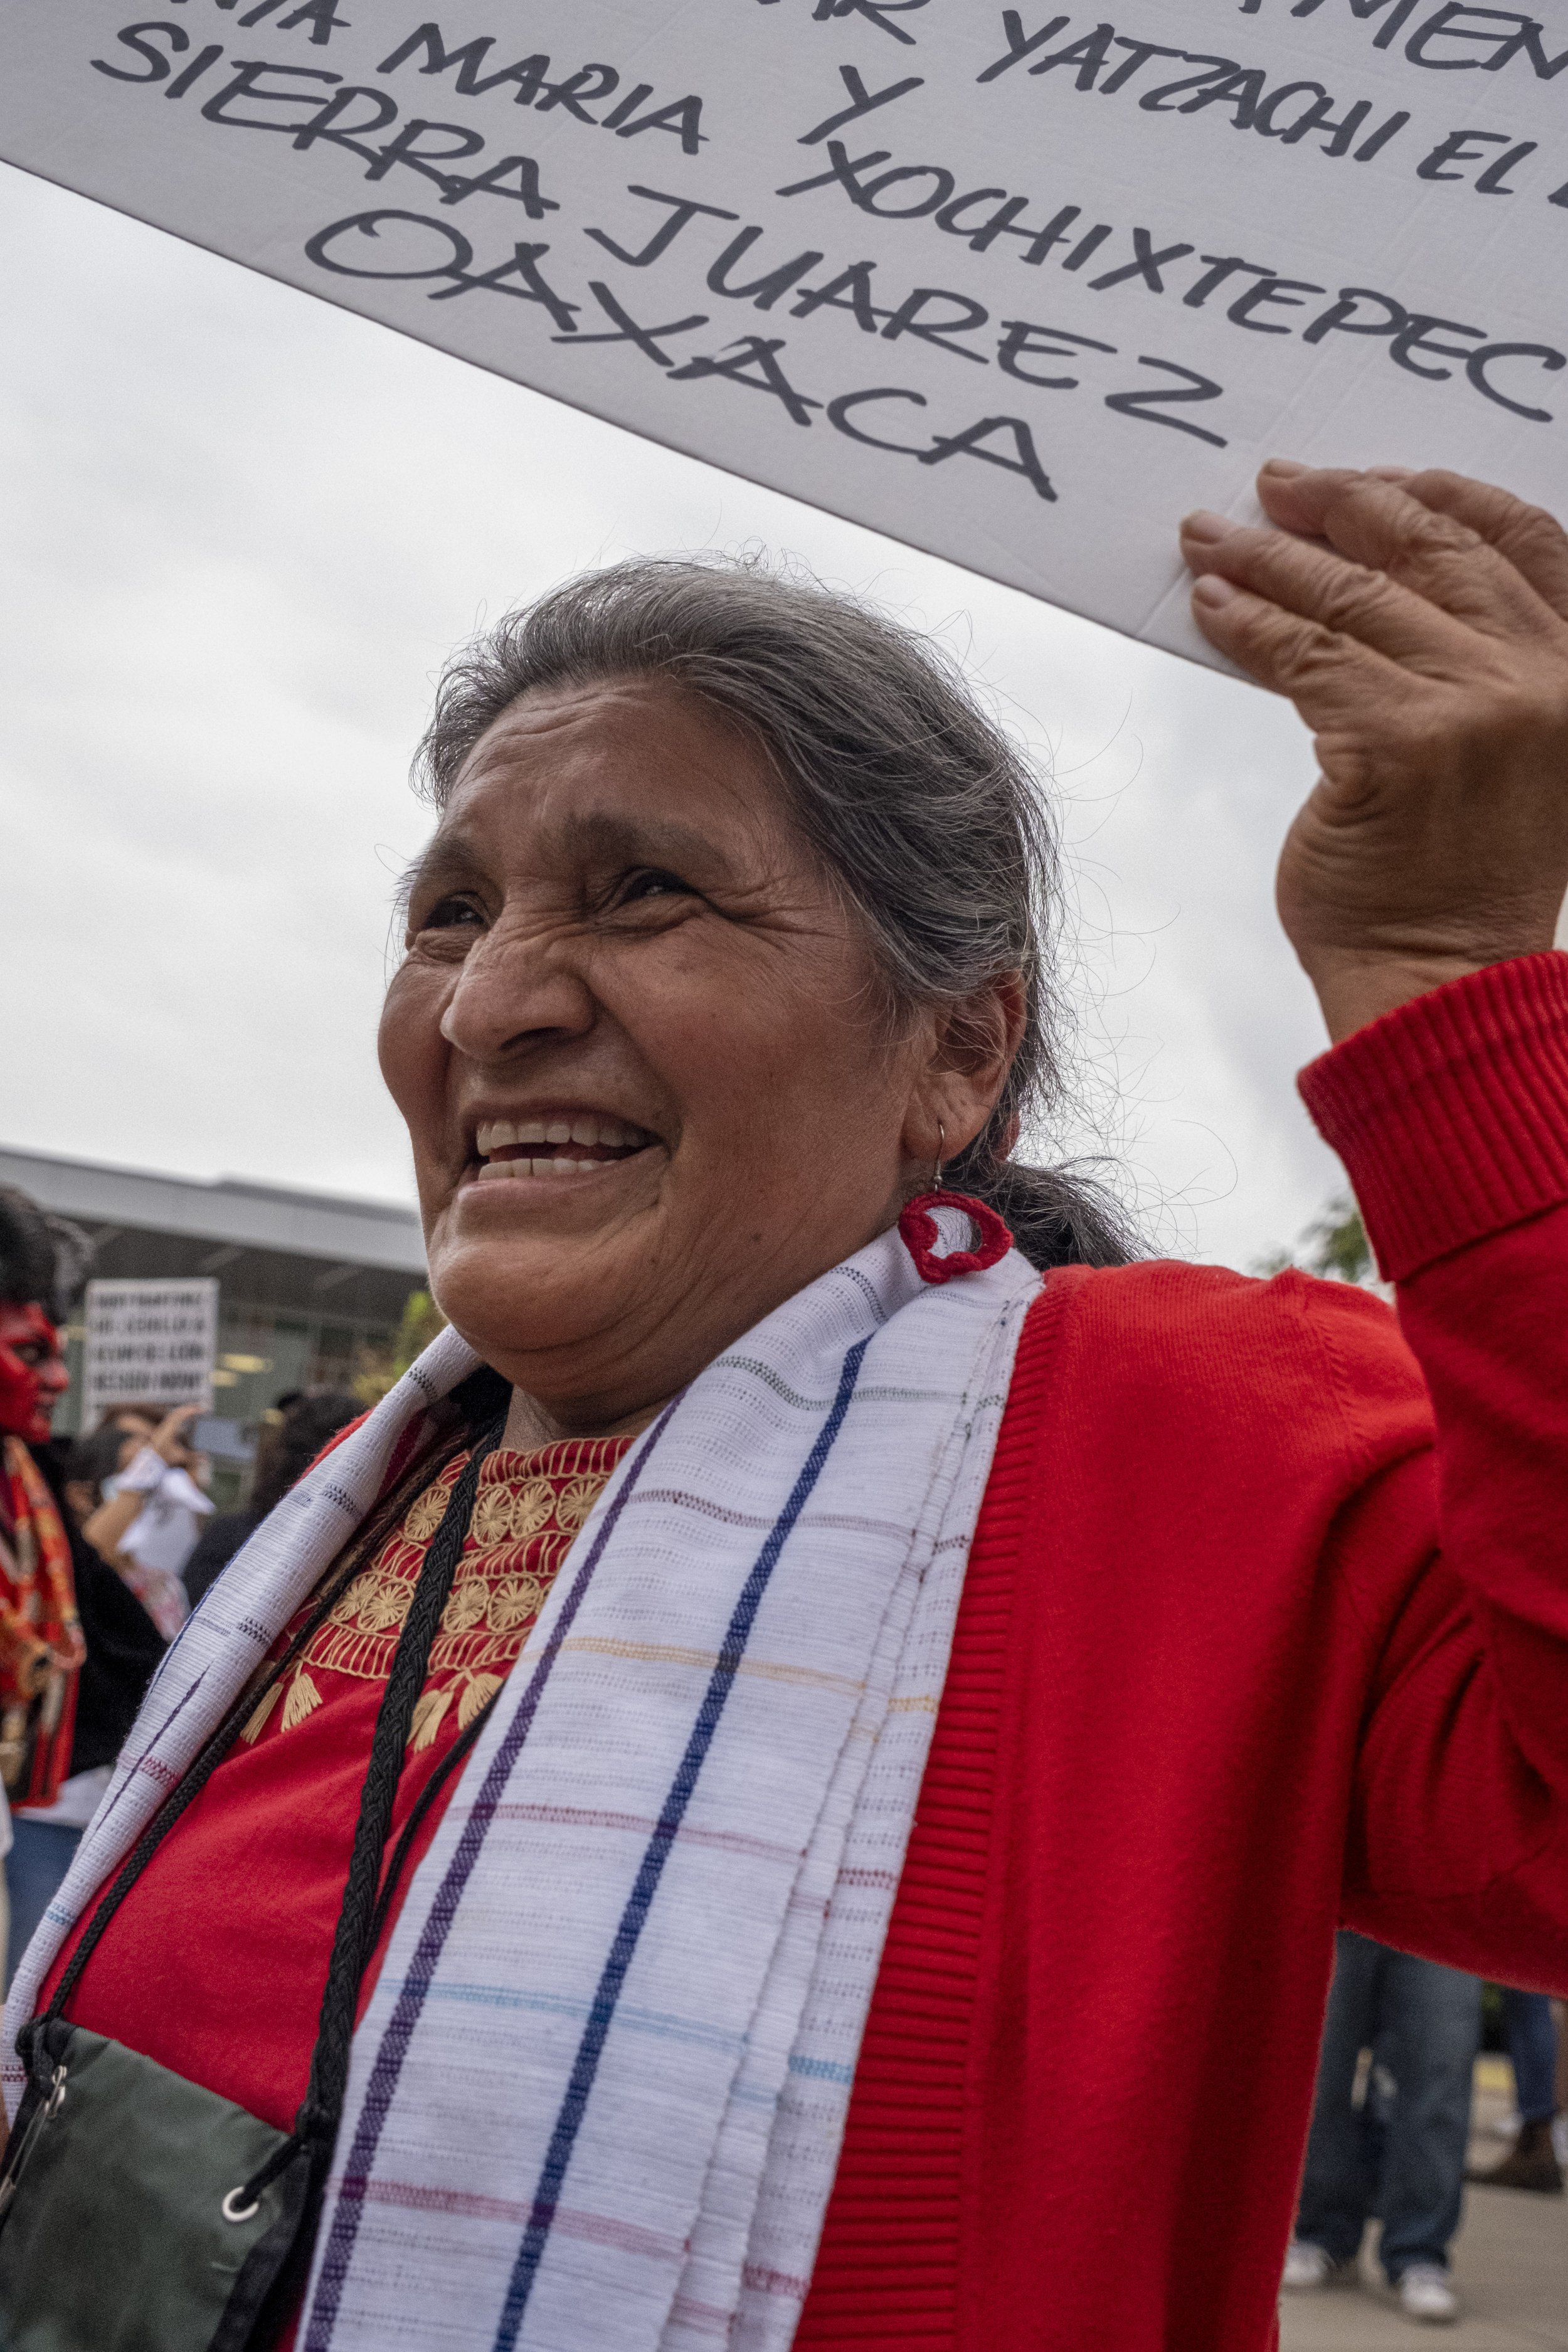  Hundreds of Oaxaca, Zapotec, Mixtec and other indigenous communities gathered to march downtown. Marcha Por Justicia was organized by Comunidades Indigenas en Liderazgo (CIELO), which means Indigenous Communities in Leadership. Marches and protests 